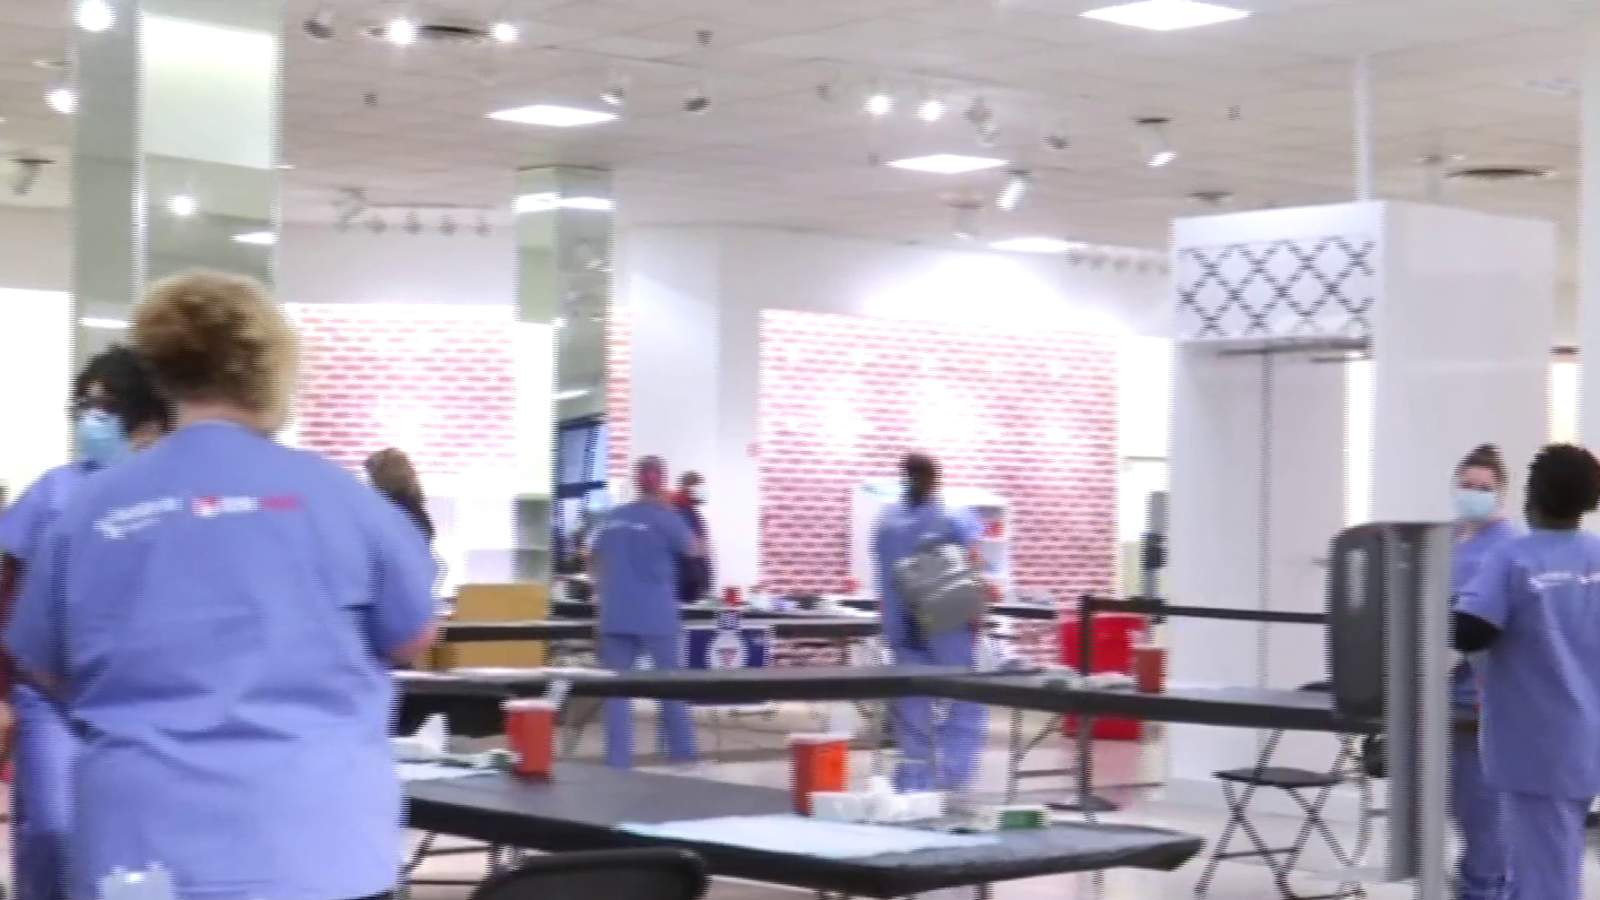 Danville’s mall is now home to one of Virginia’s three mass coronavirus vaccination centers